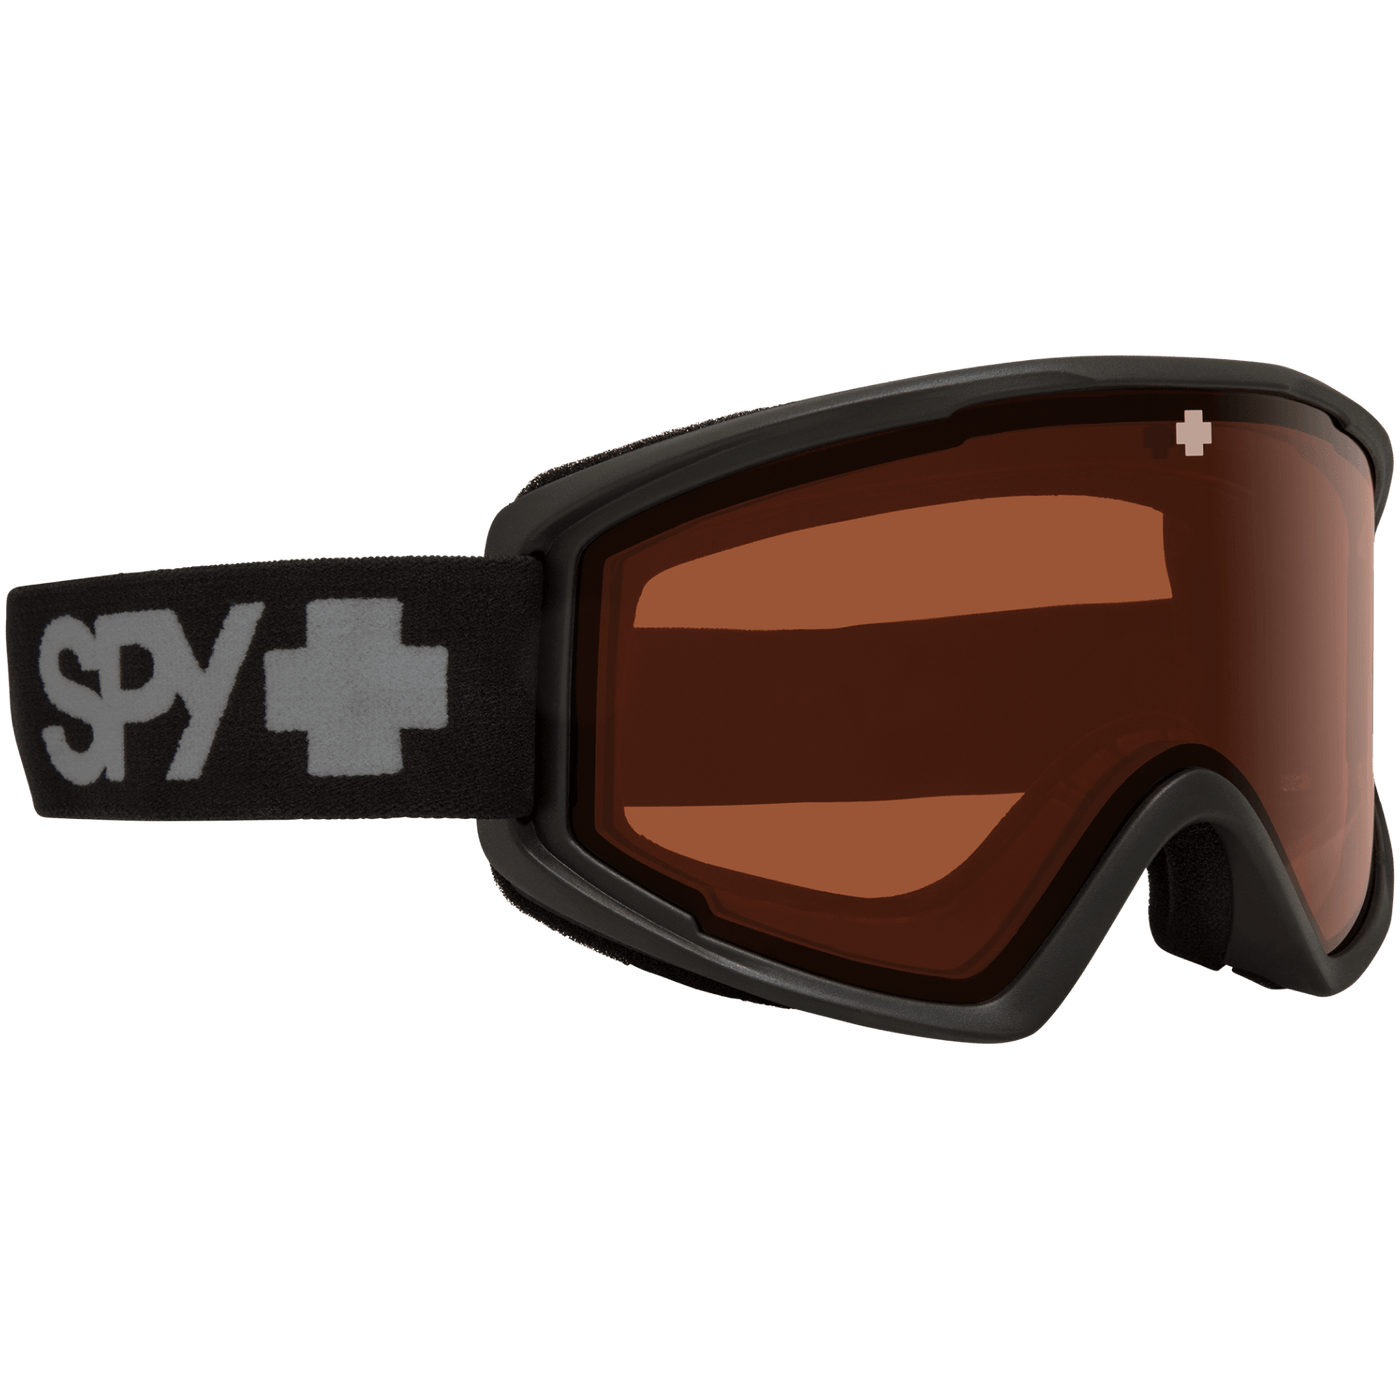 SPY Crusher Elite Snow Goggles Black with HD Persimmon Lens 8Lines Shop - Fast Shipping